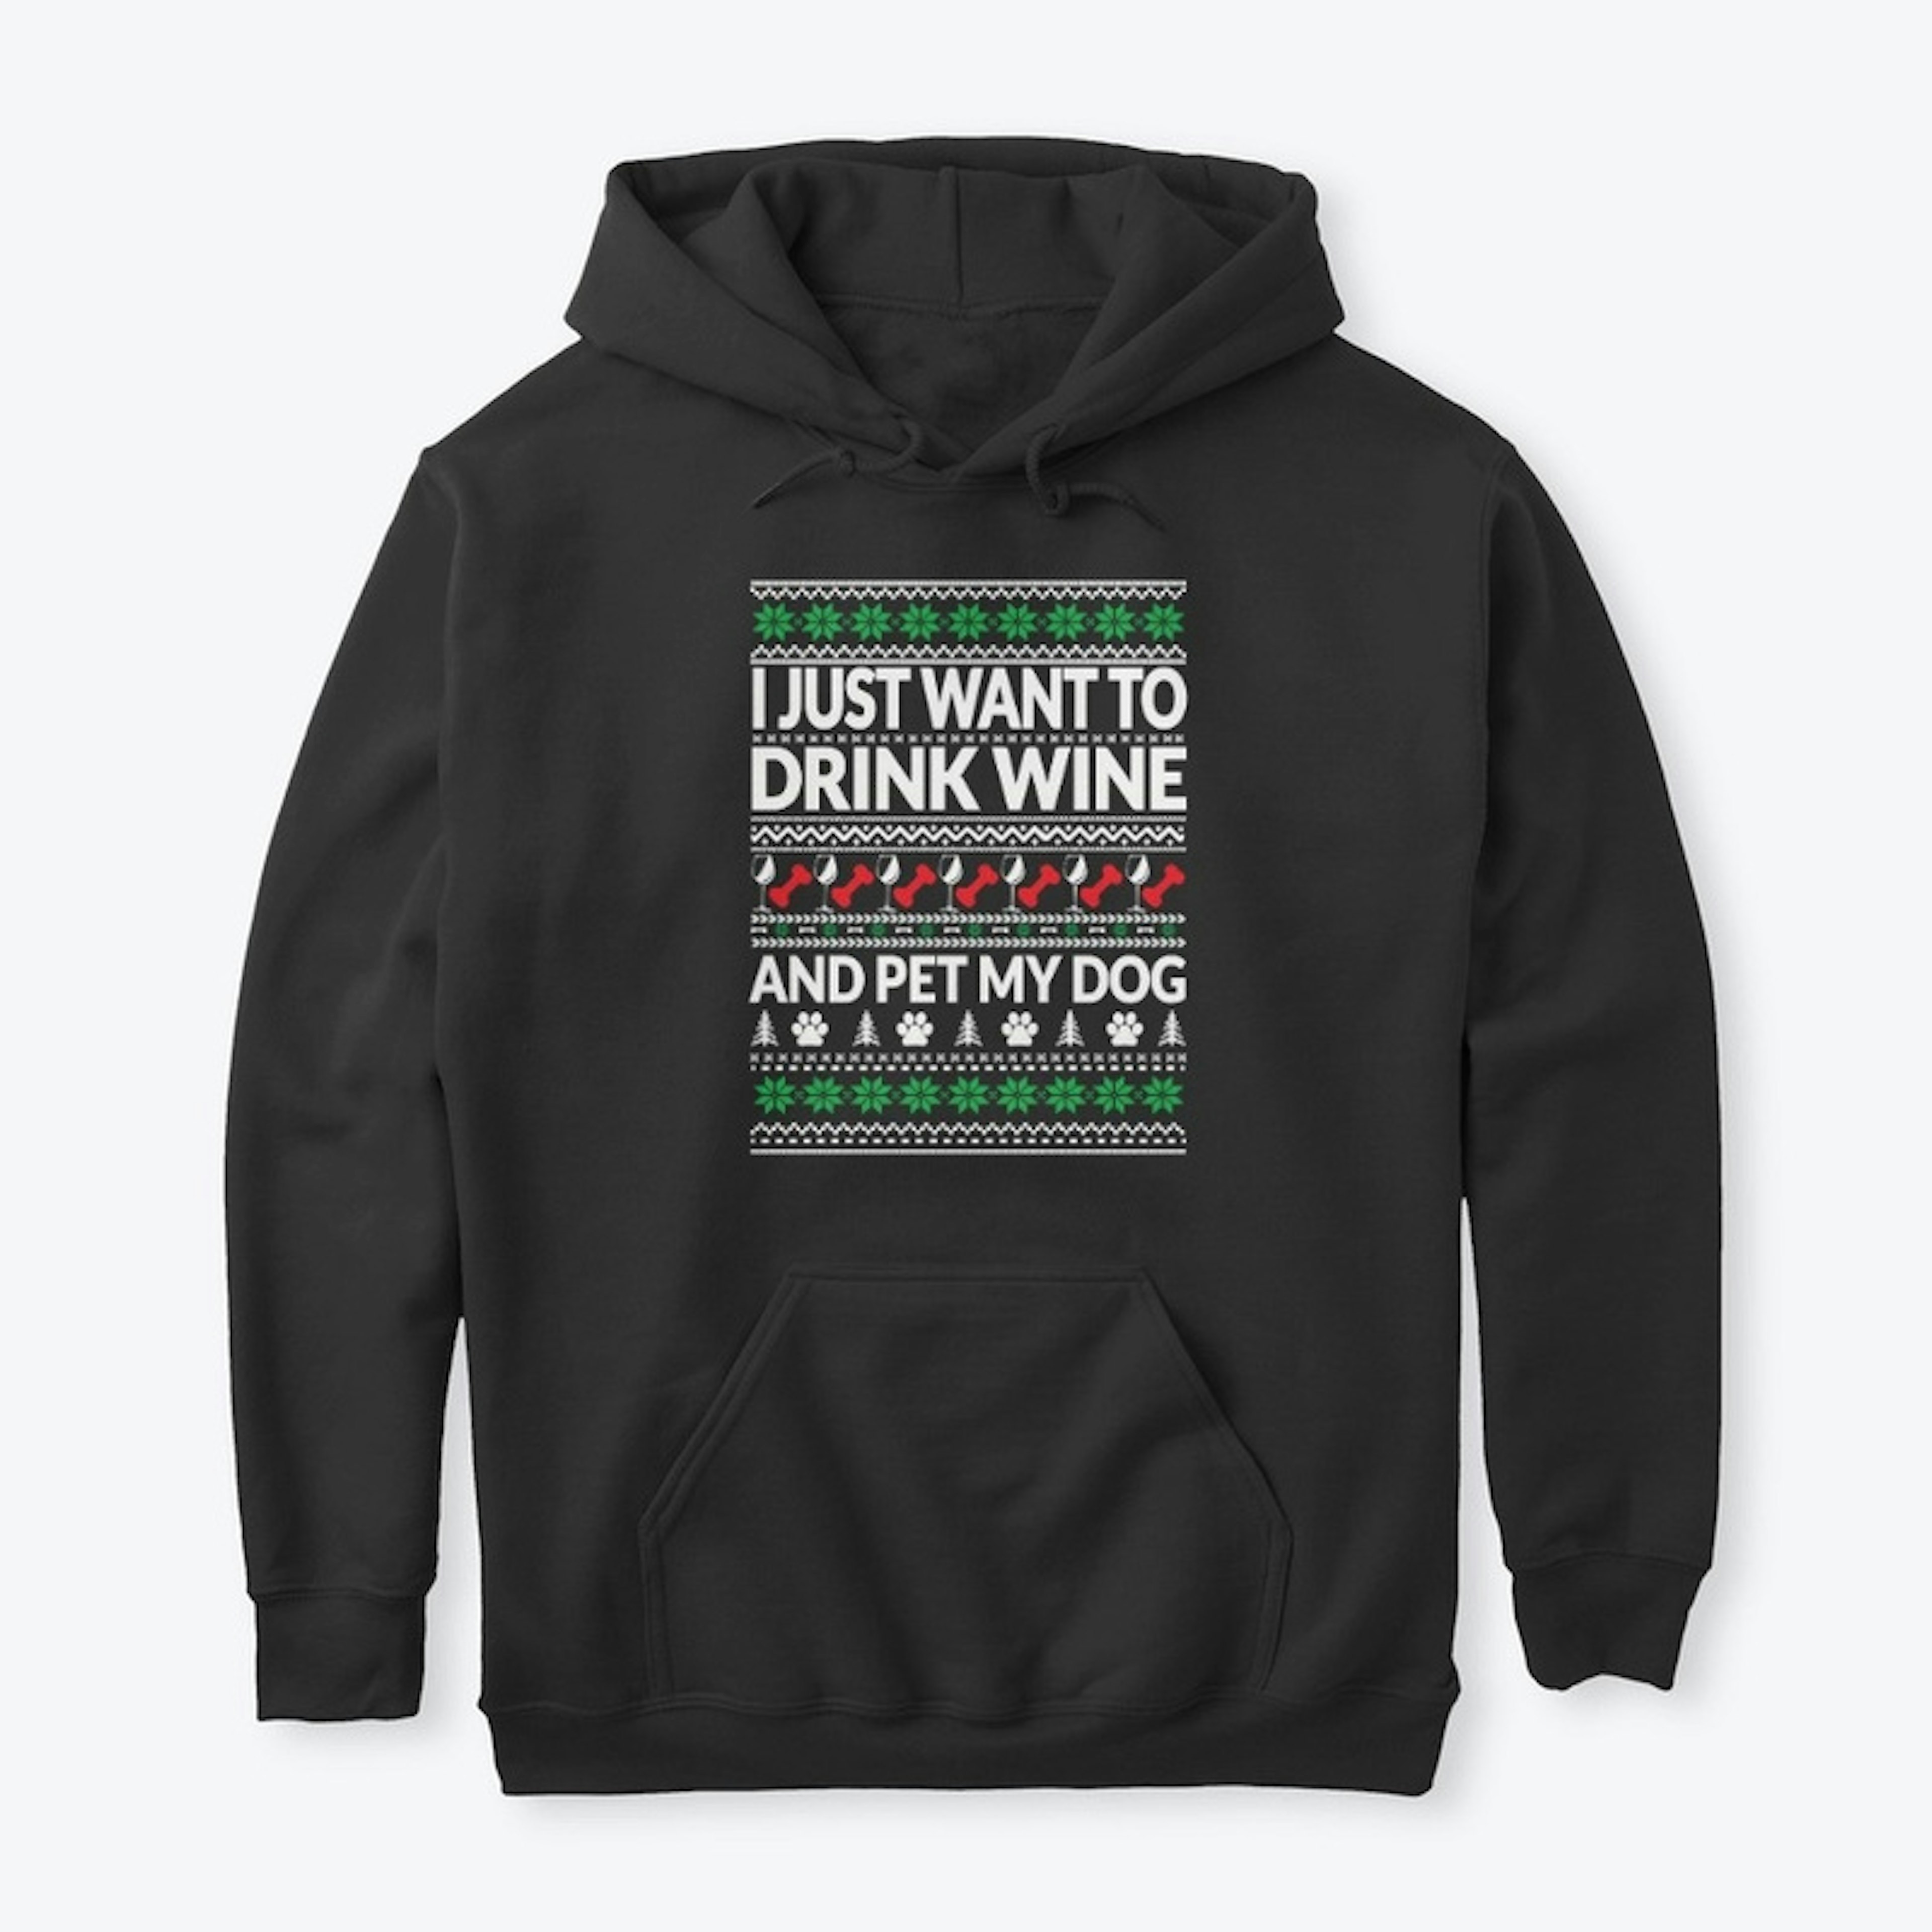 I just want to drink wine shirt